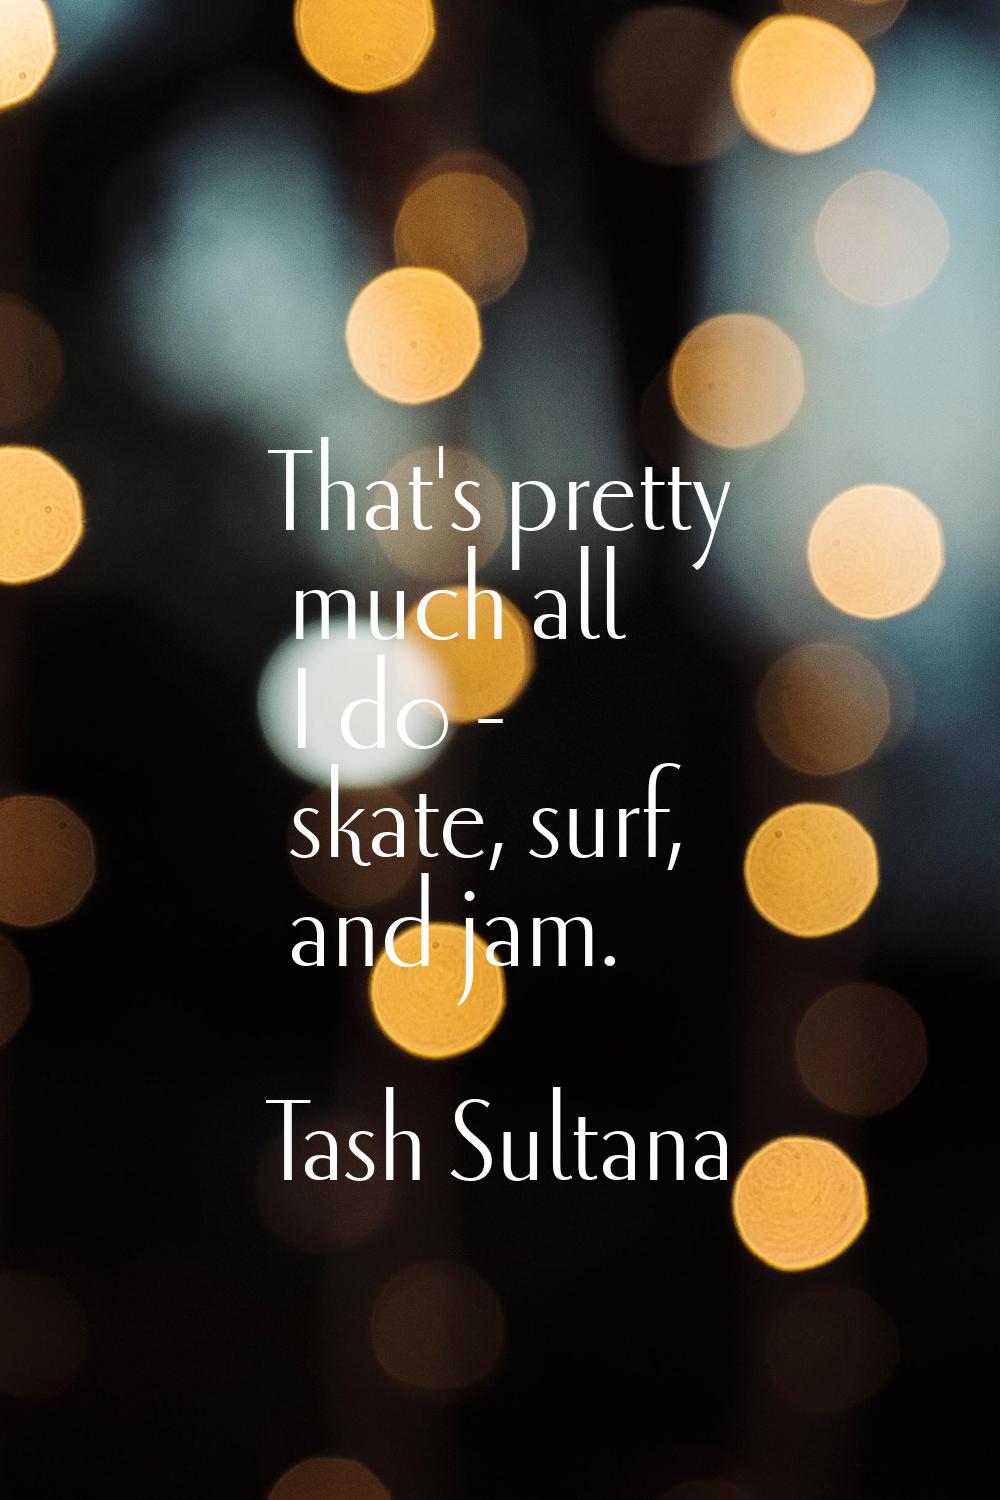 That's pretty much all I do - skate, surf, and jam.